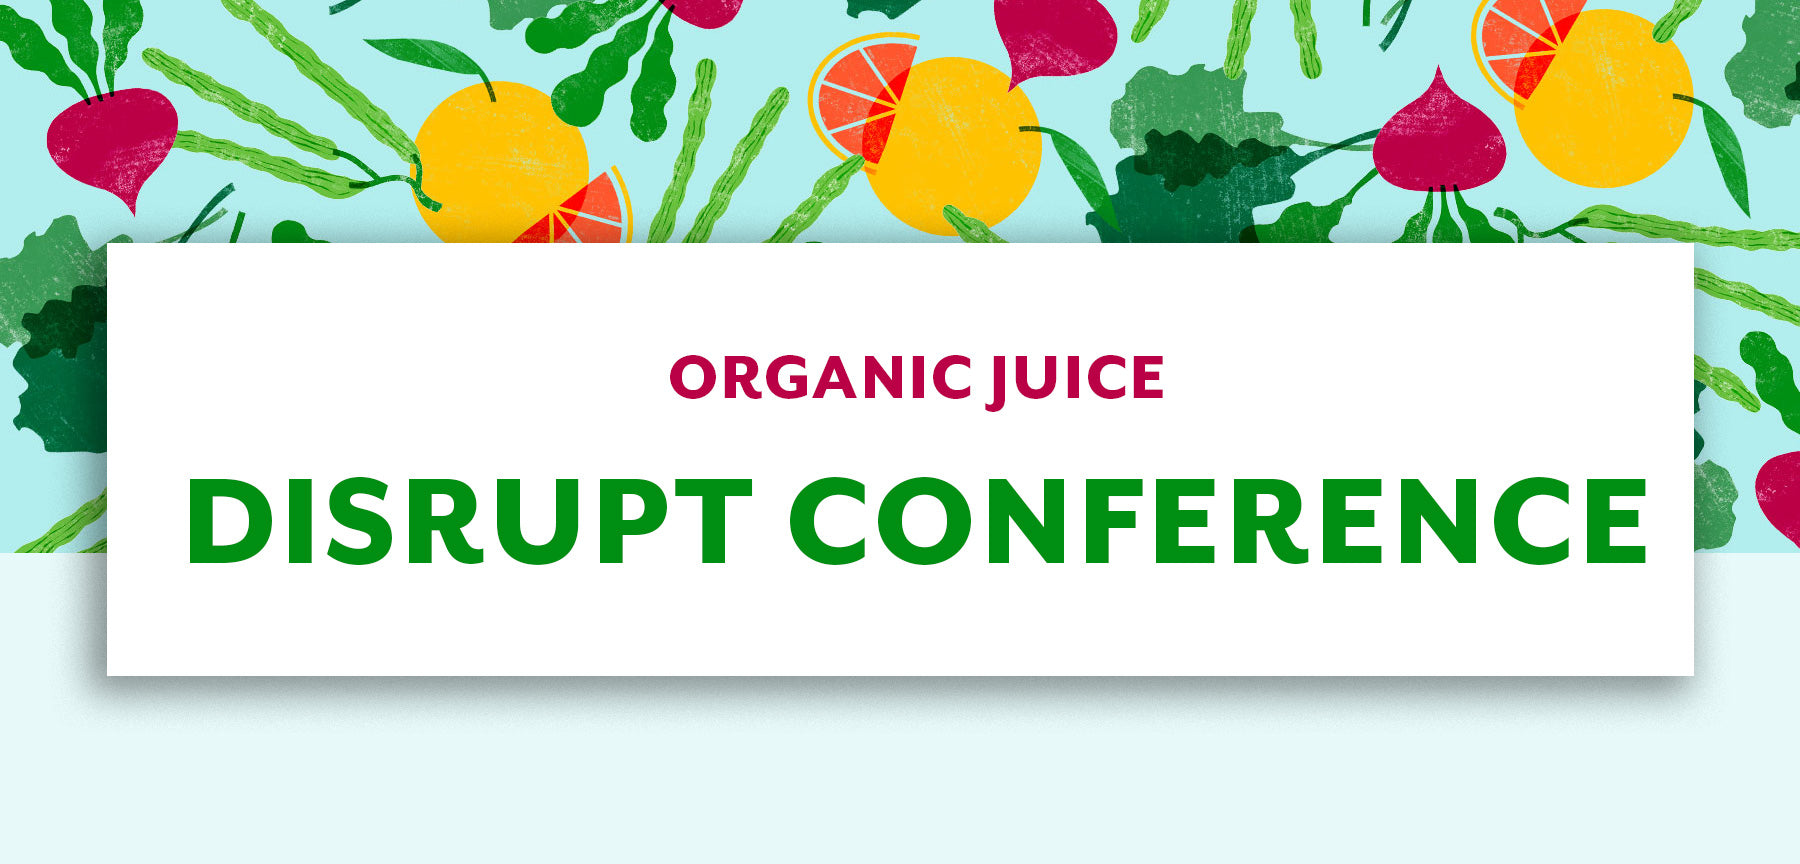 Pre order organic juices to enjoy during the Disrupt Conference Weekend in Atlanta. September 28th - September 30th.